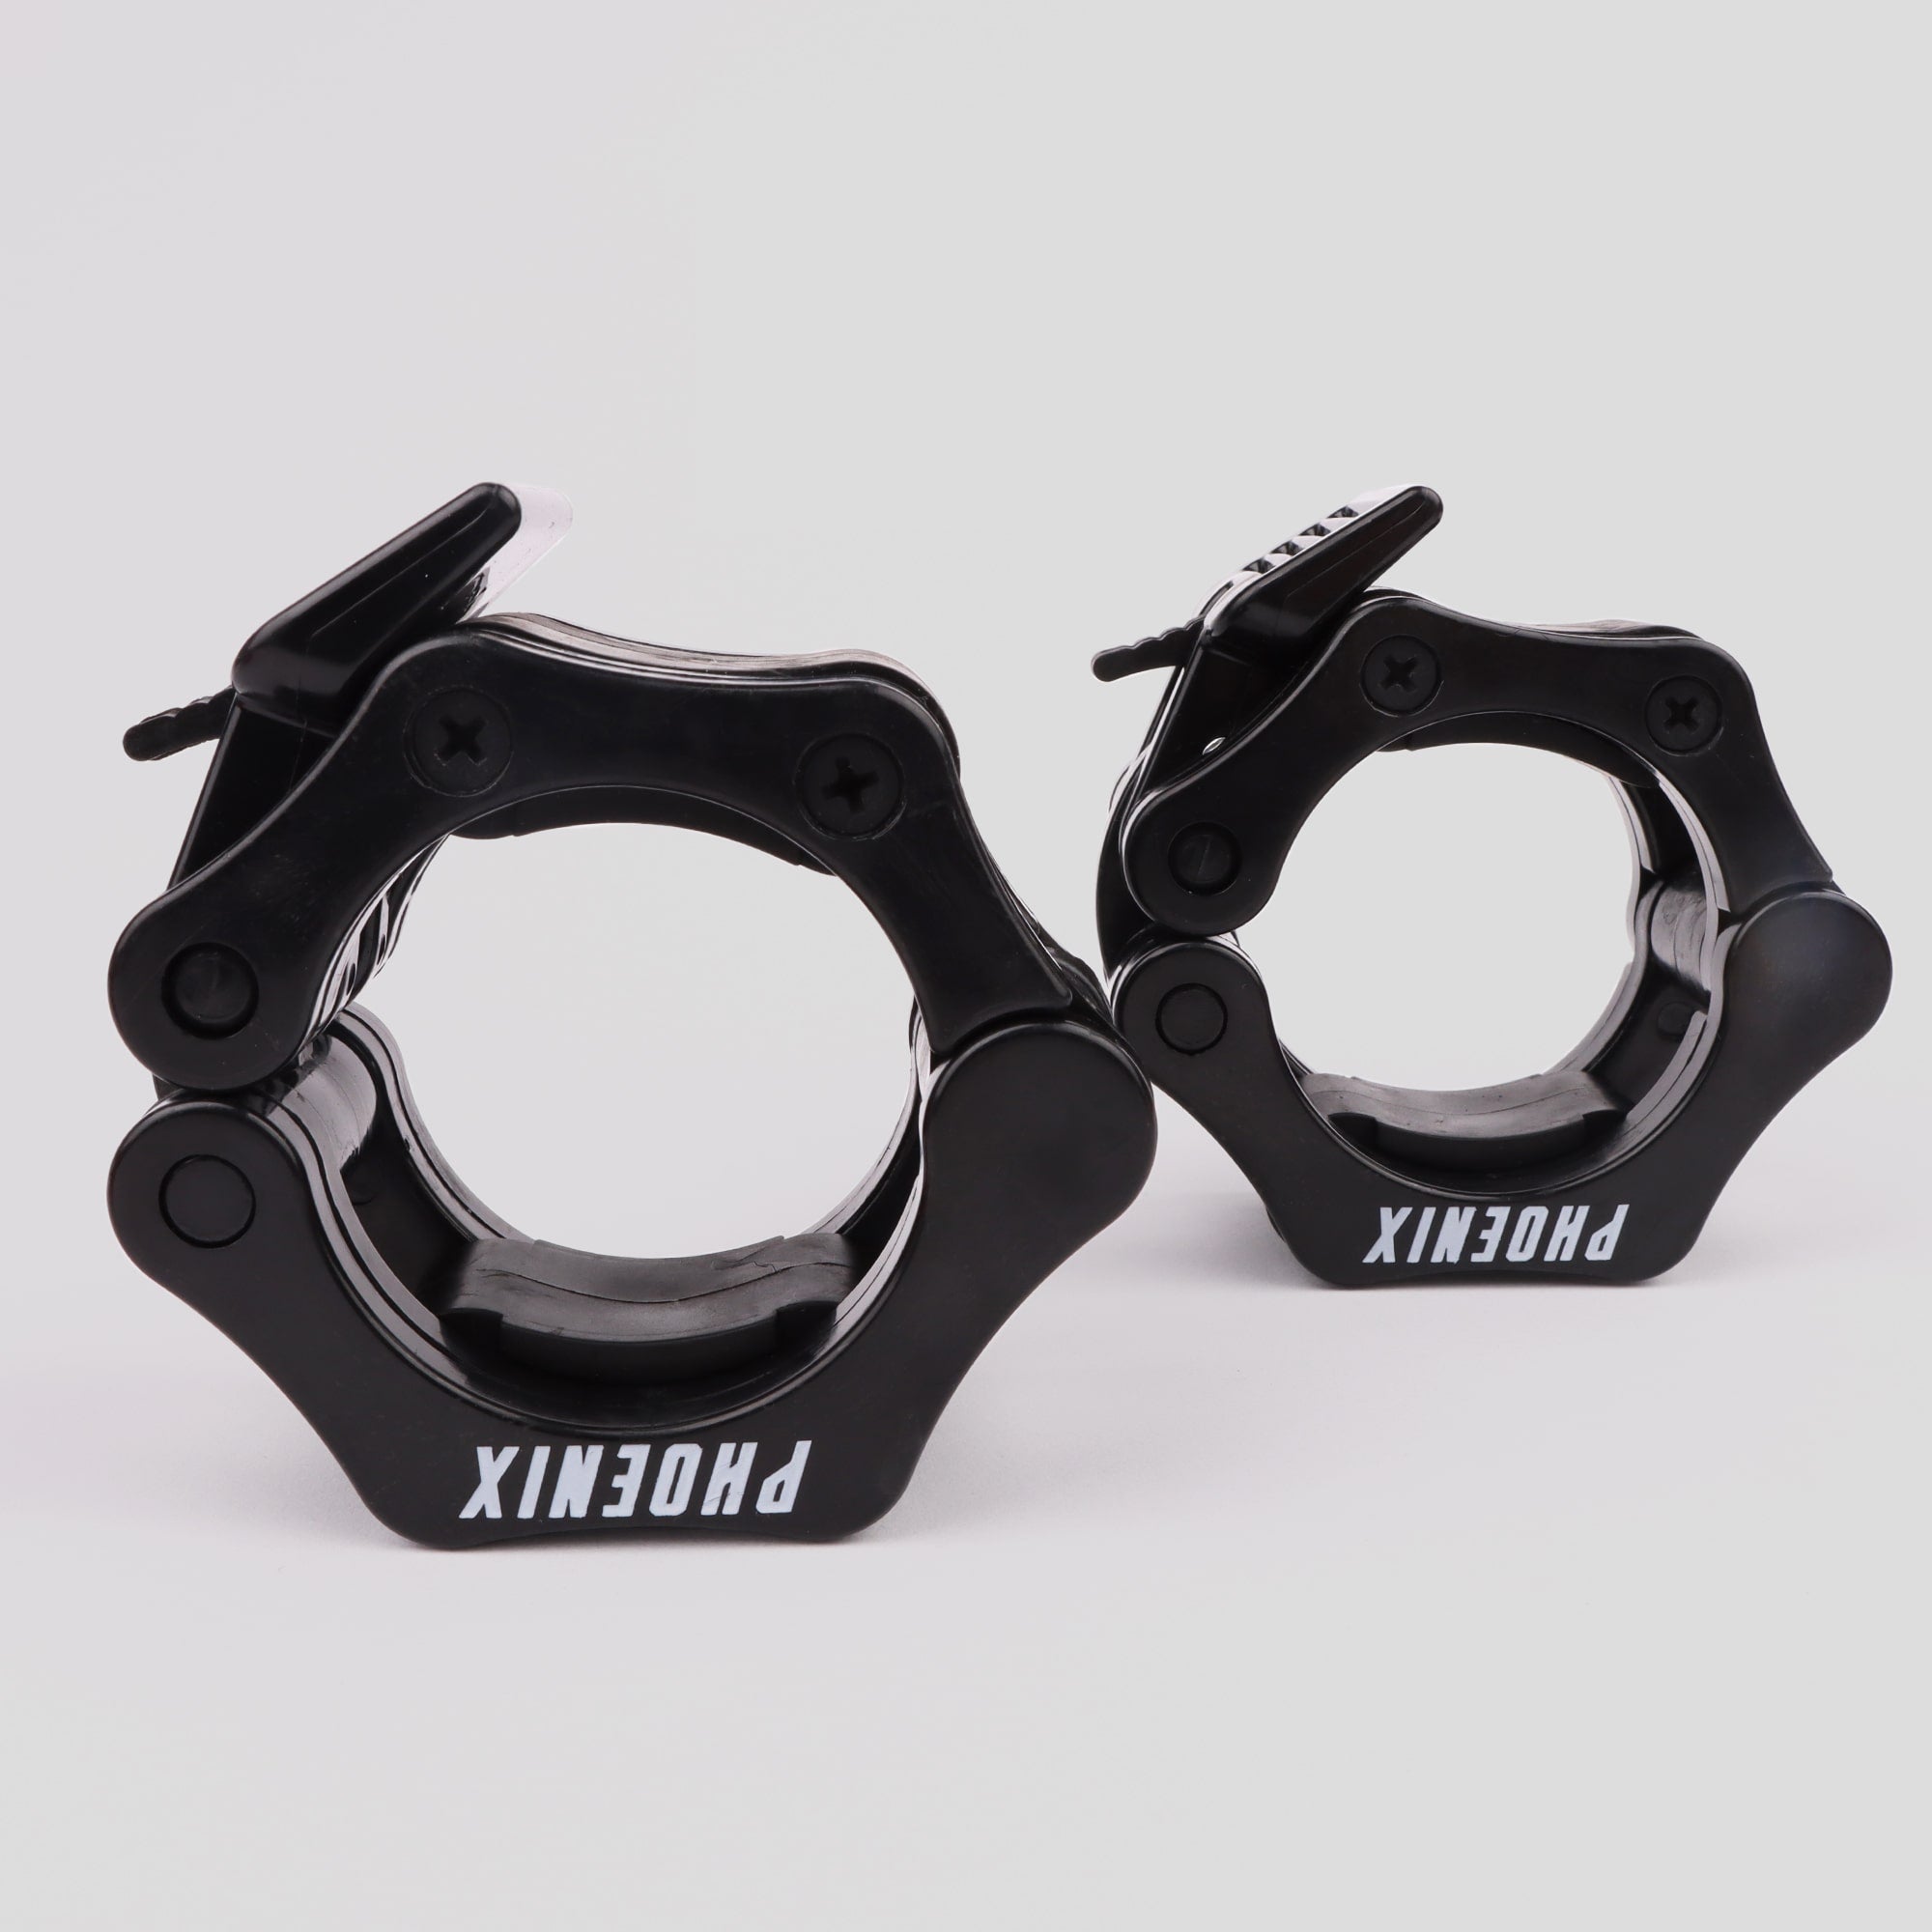 Olympic 2-inch Barbell Clamps - Black